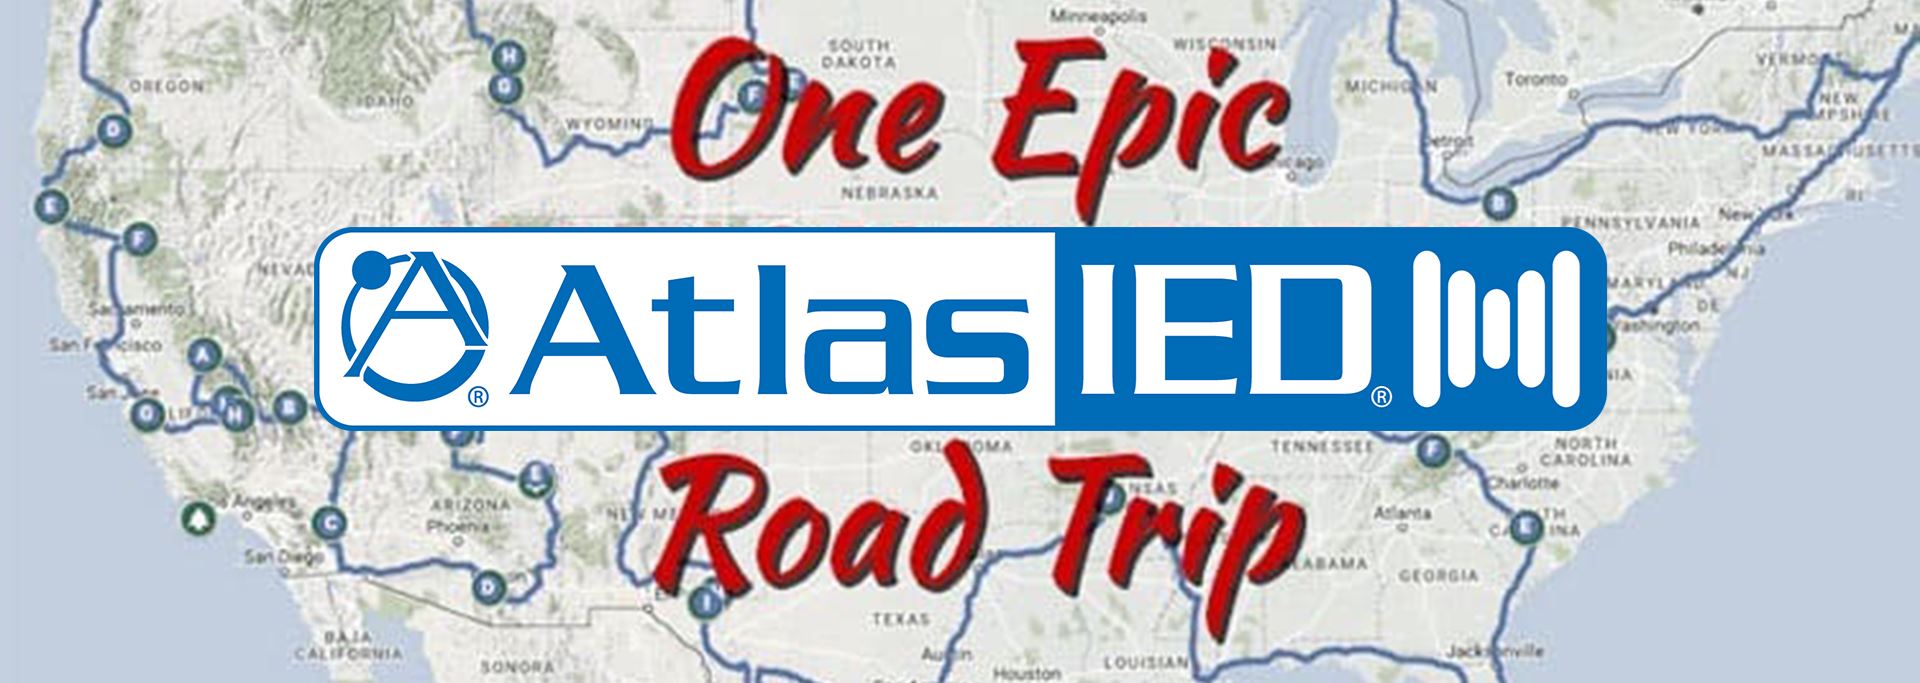 AtlasIED Expands 2019 Event Schedule for Increased Industry Learning Opportunities